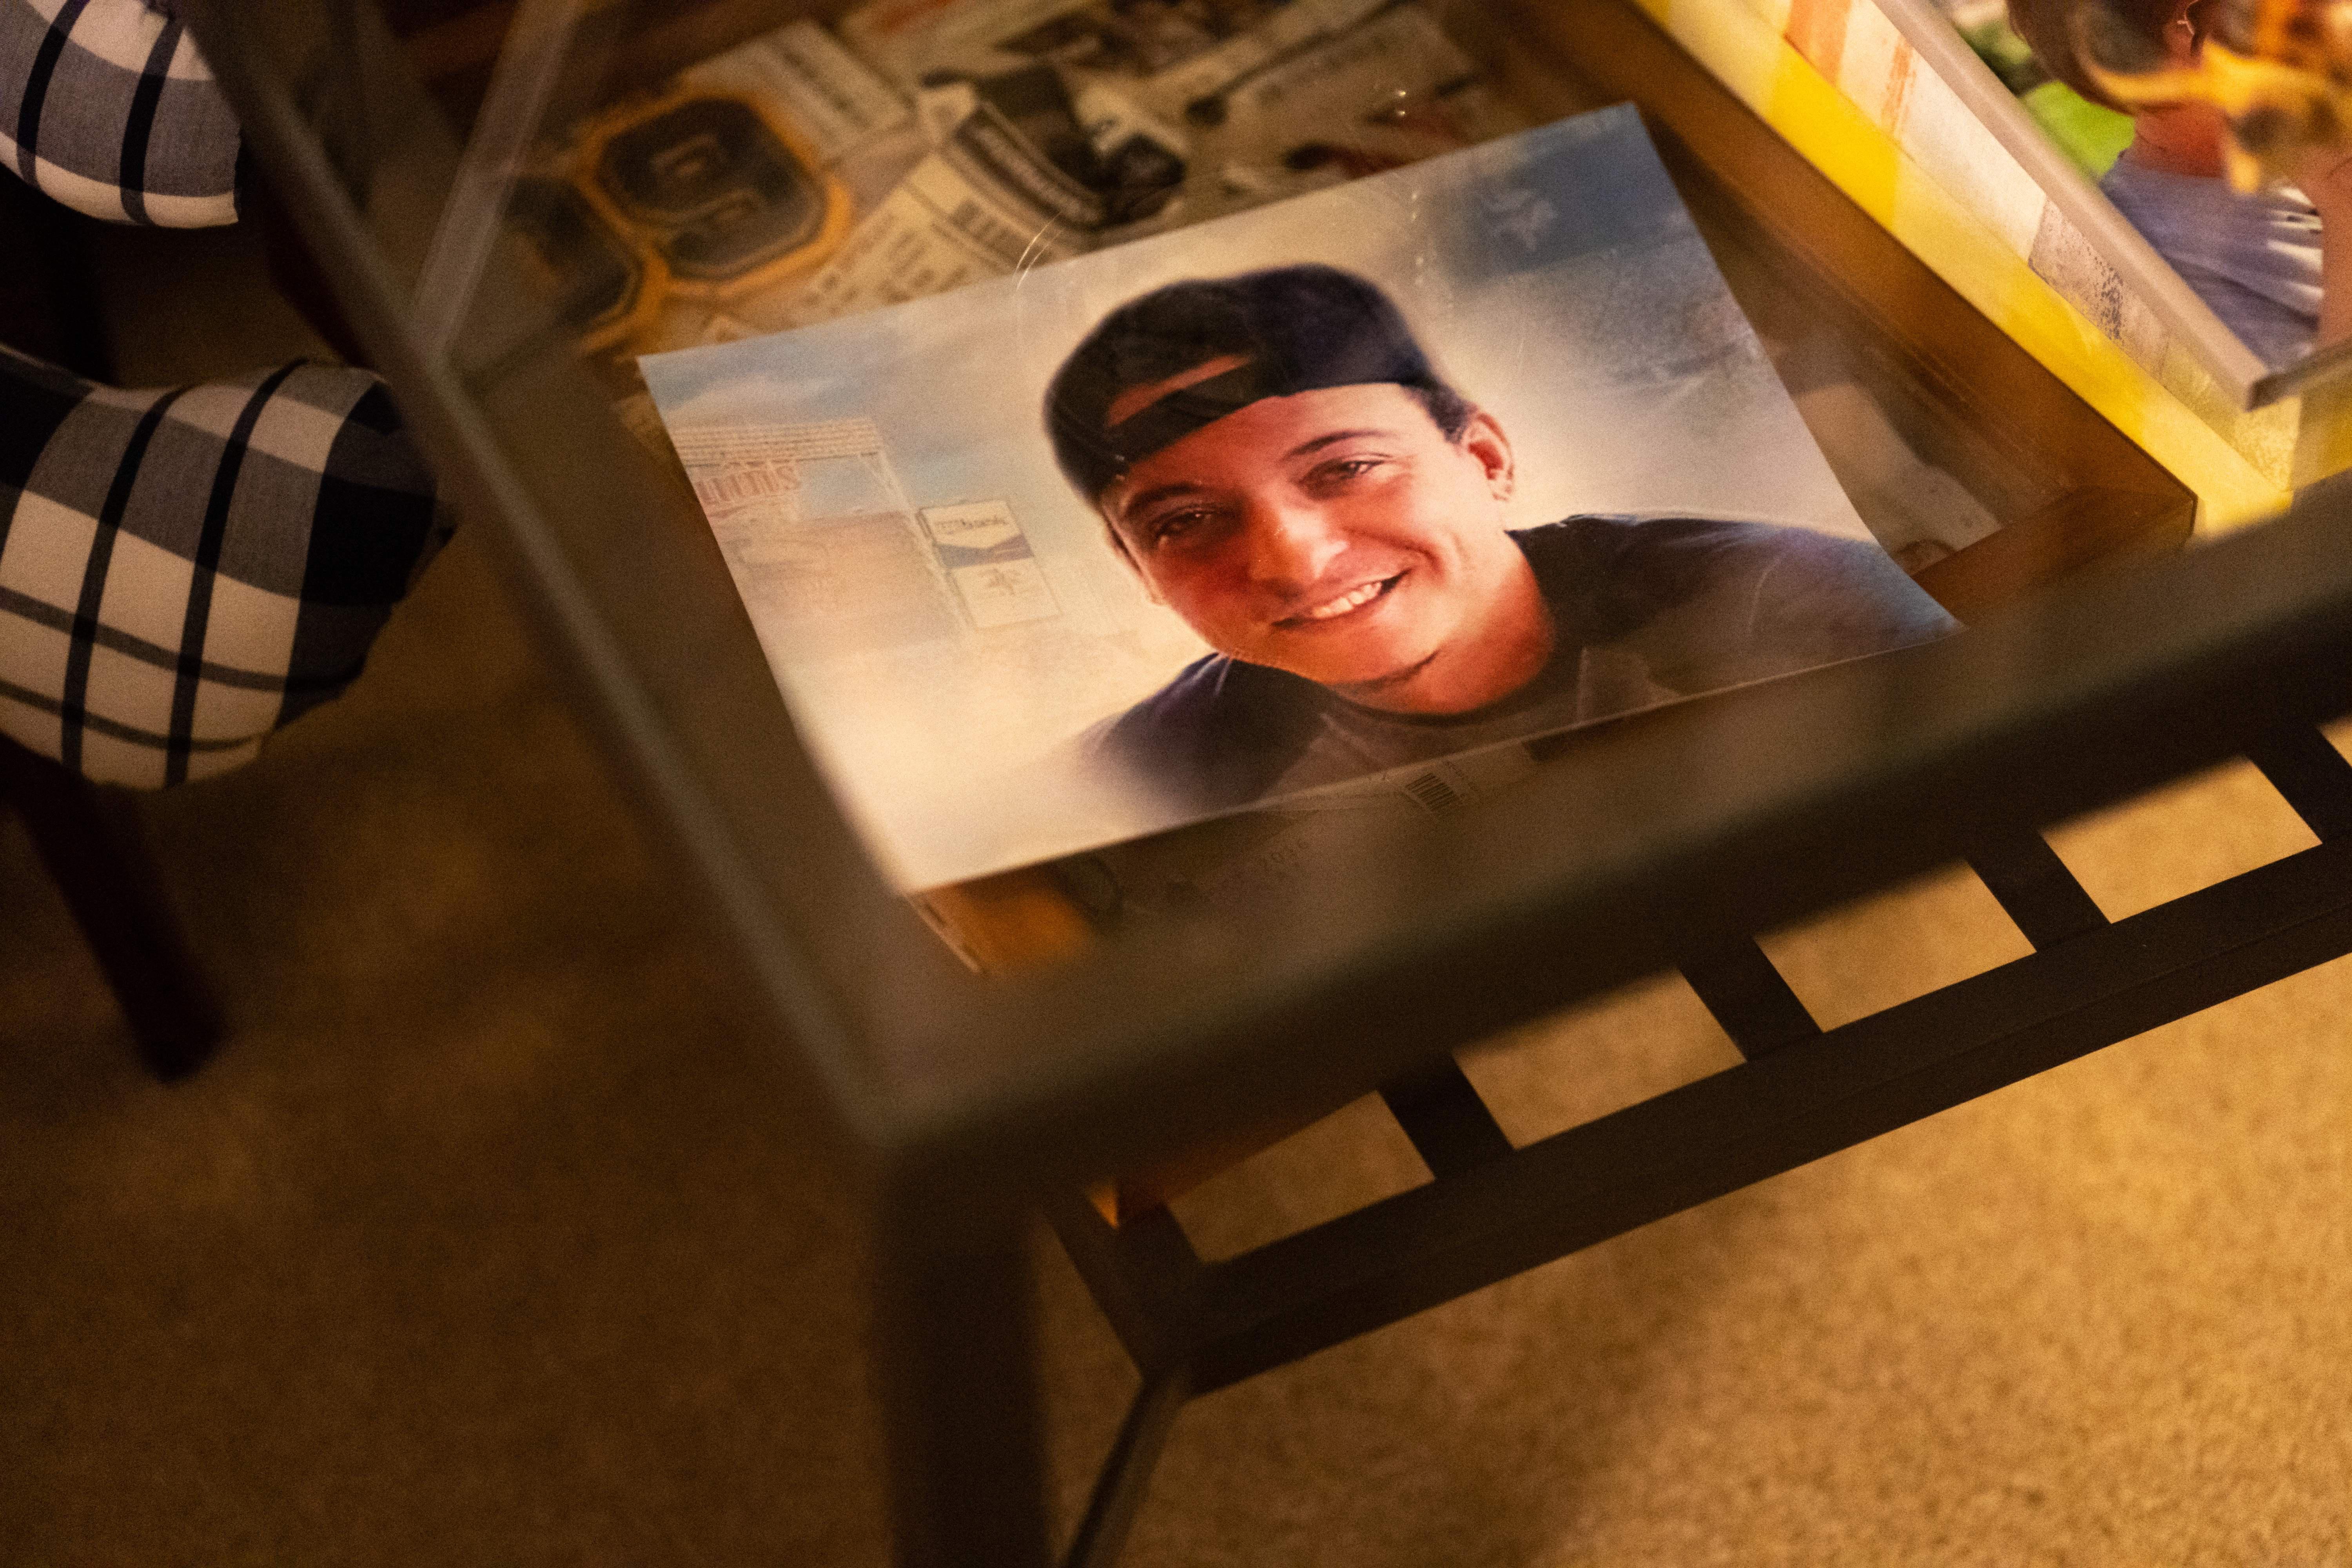 A picture of Alec on a coffee table